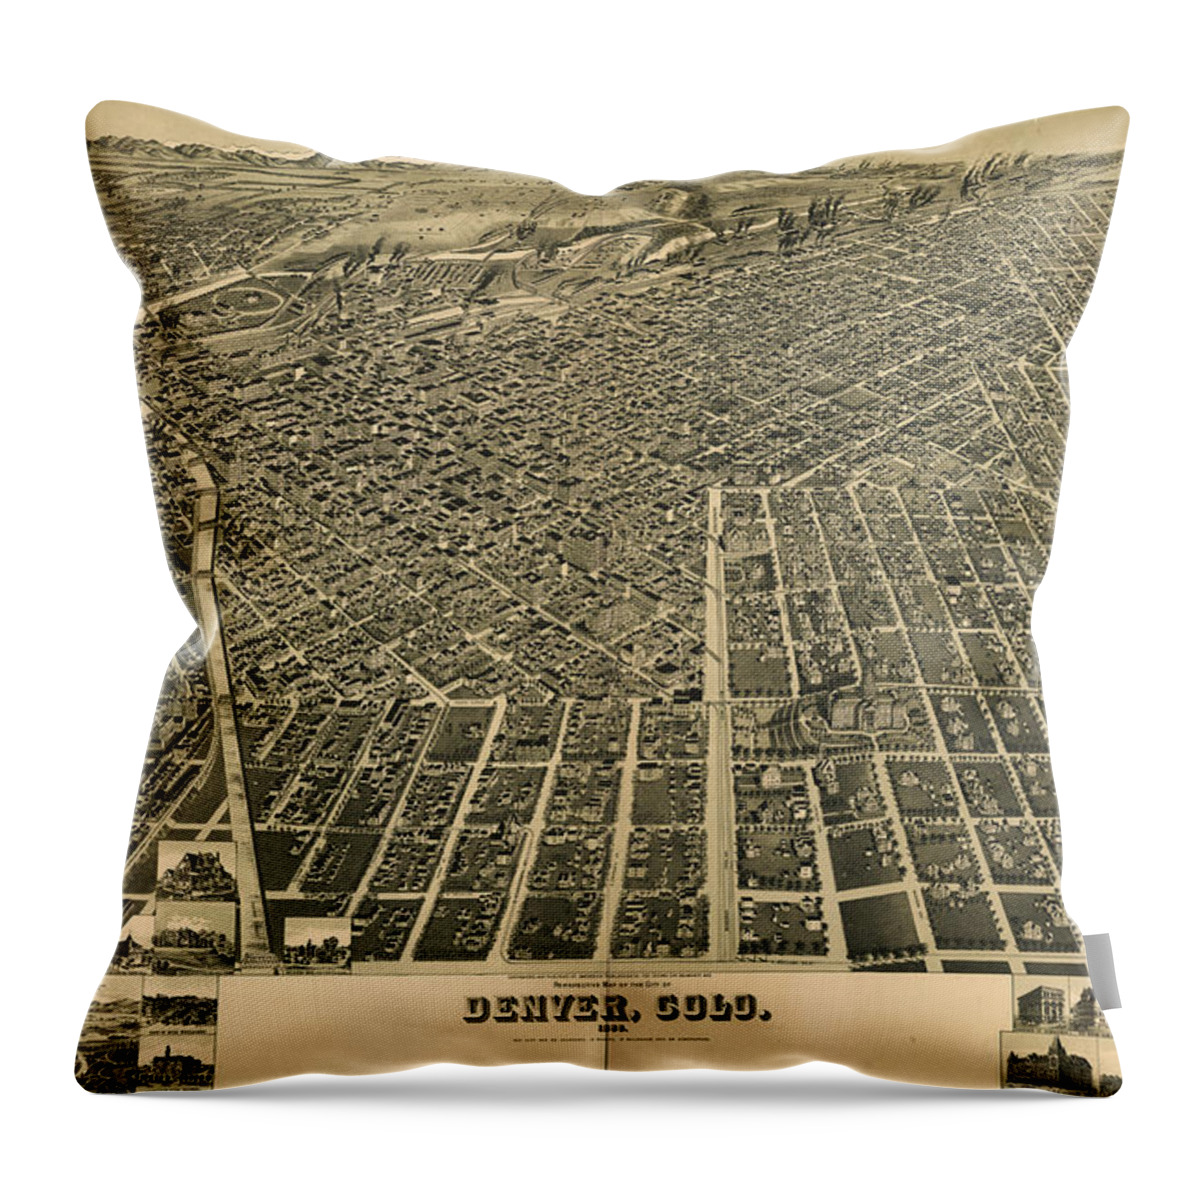 Denver Throw Pillow featuring the drawing Wellge's Birdseye Map of Denver Colorado - 1889 by Eric Glaser